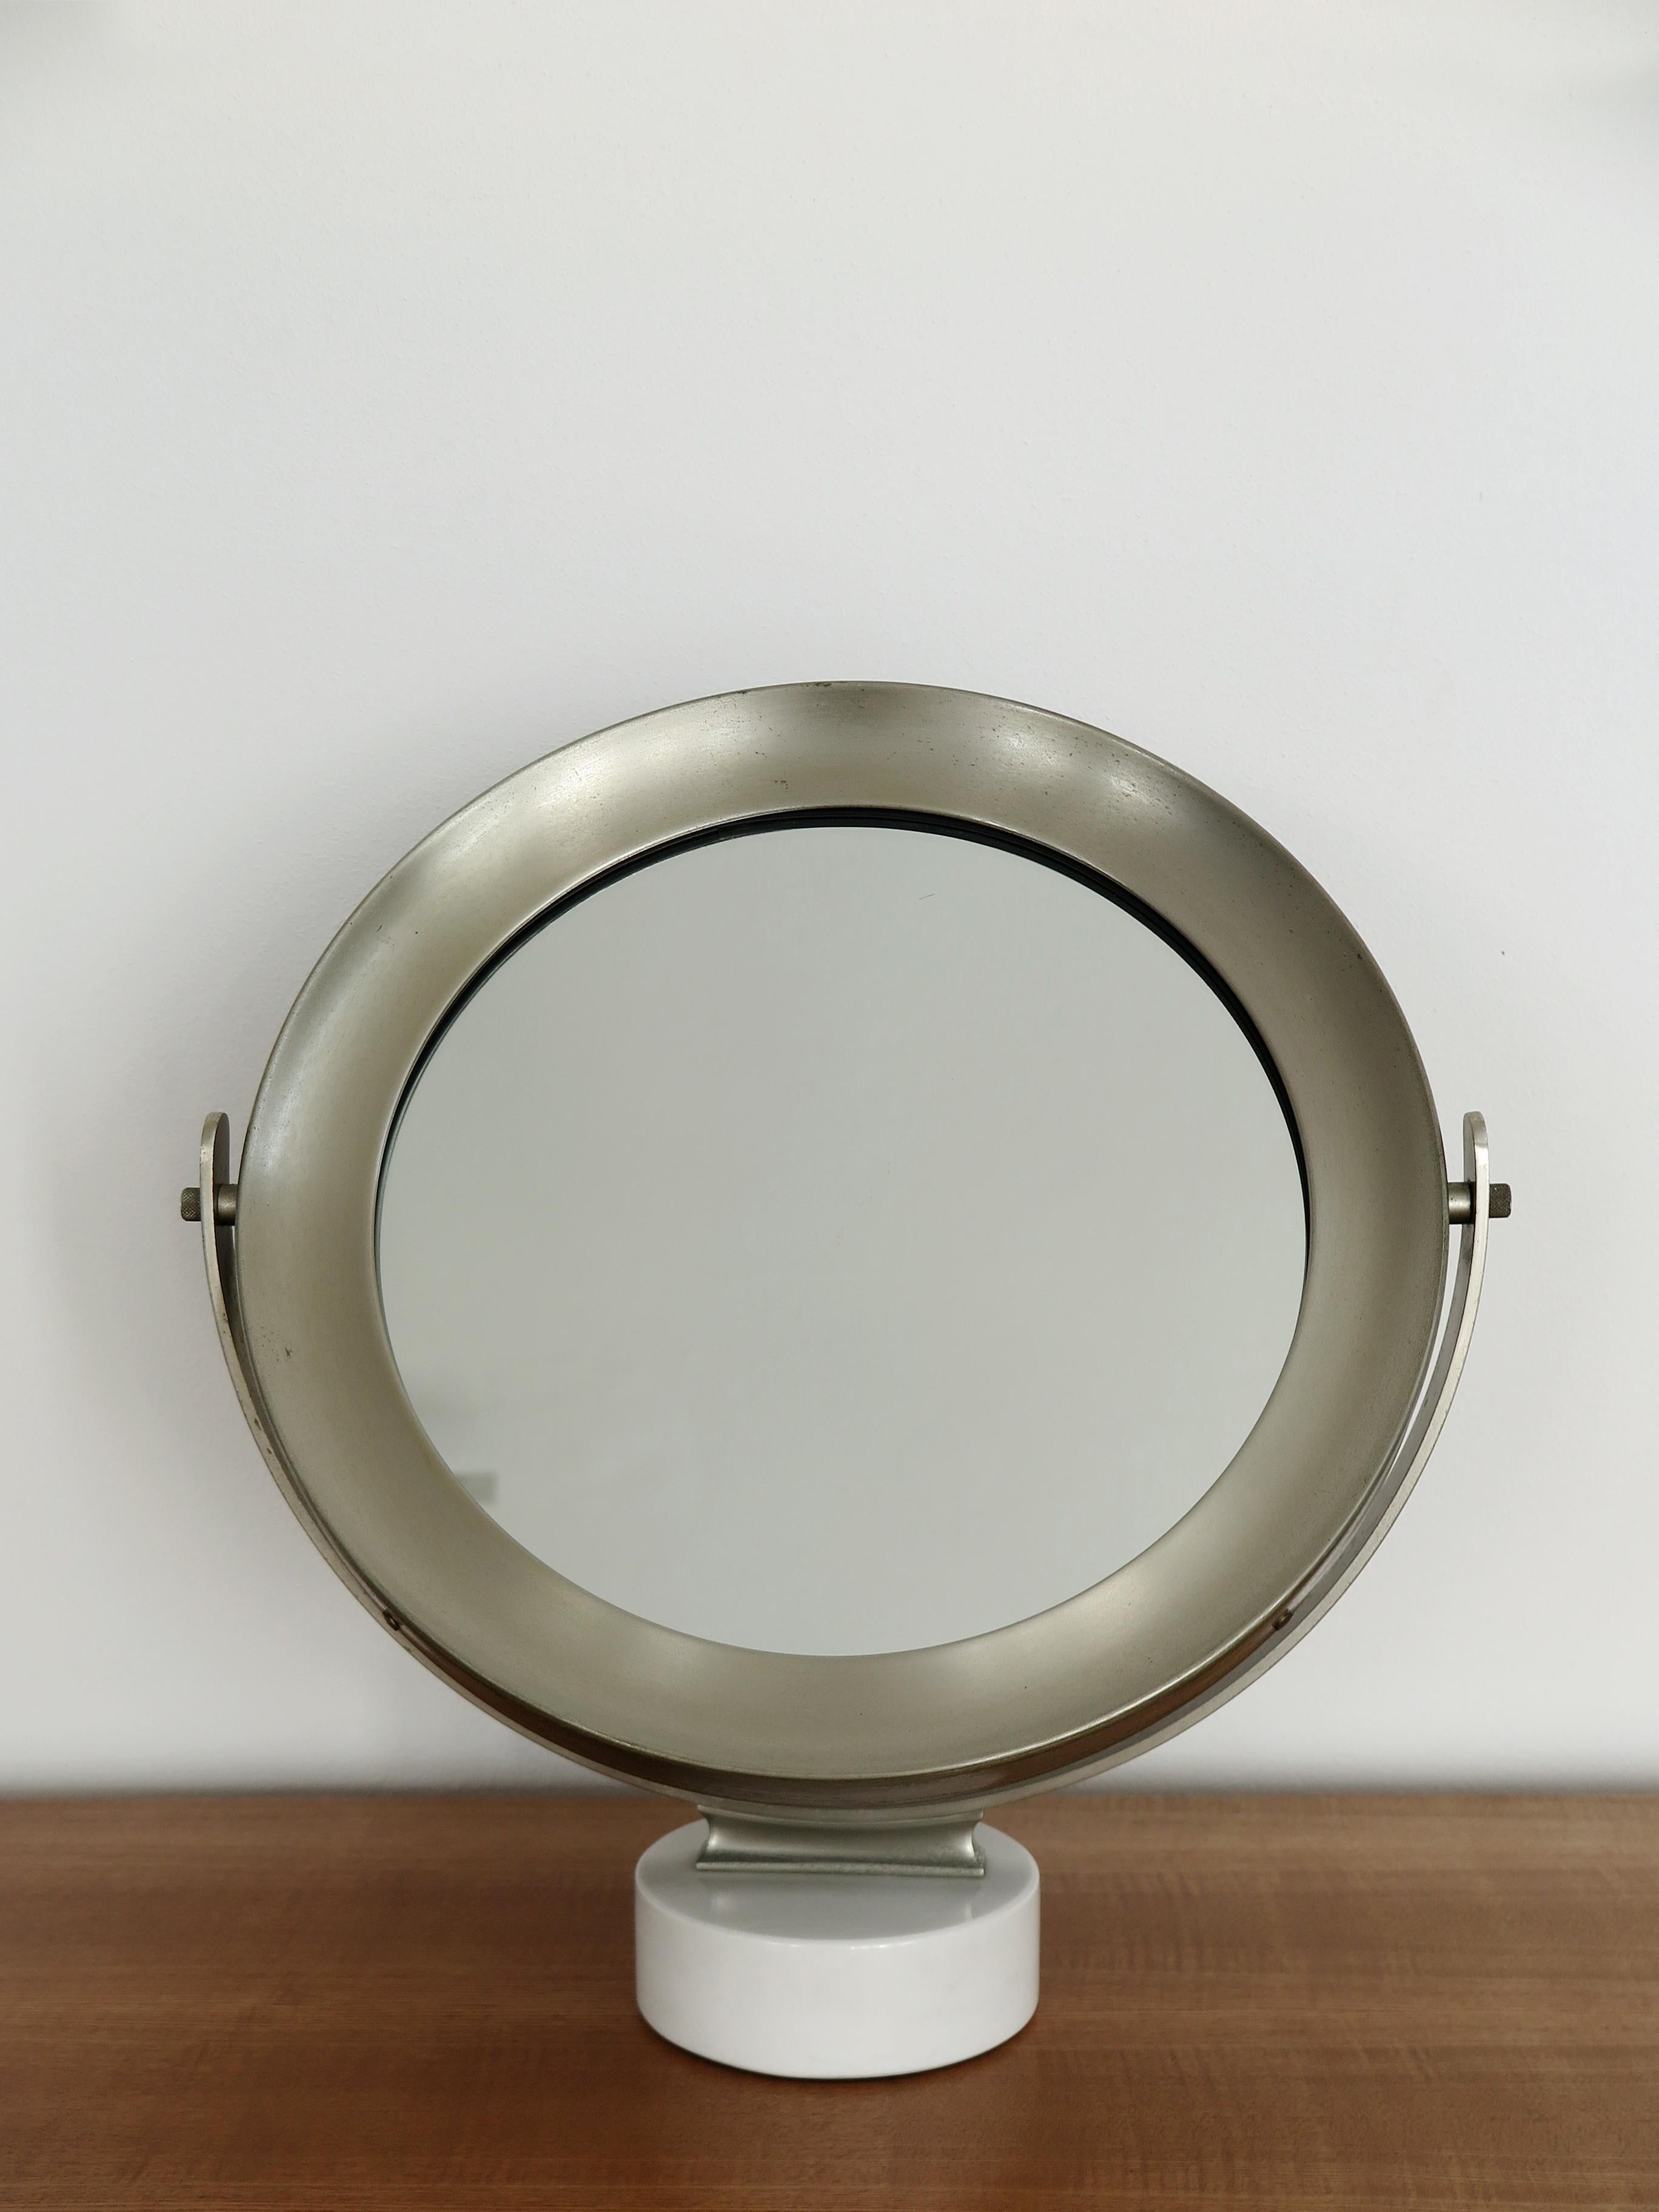 Italian Mid-Century Modern design swivel table mirror model Narciso designed by Sergio Mazza for Artemide with white marble base, 1960s.

Please note that the item is original of the period and this shows normal signs of age and use.